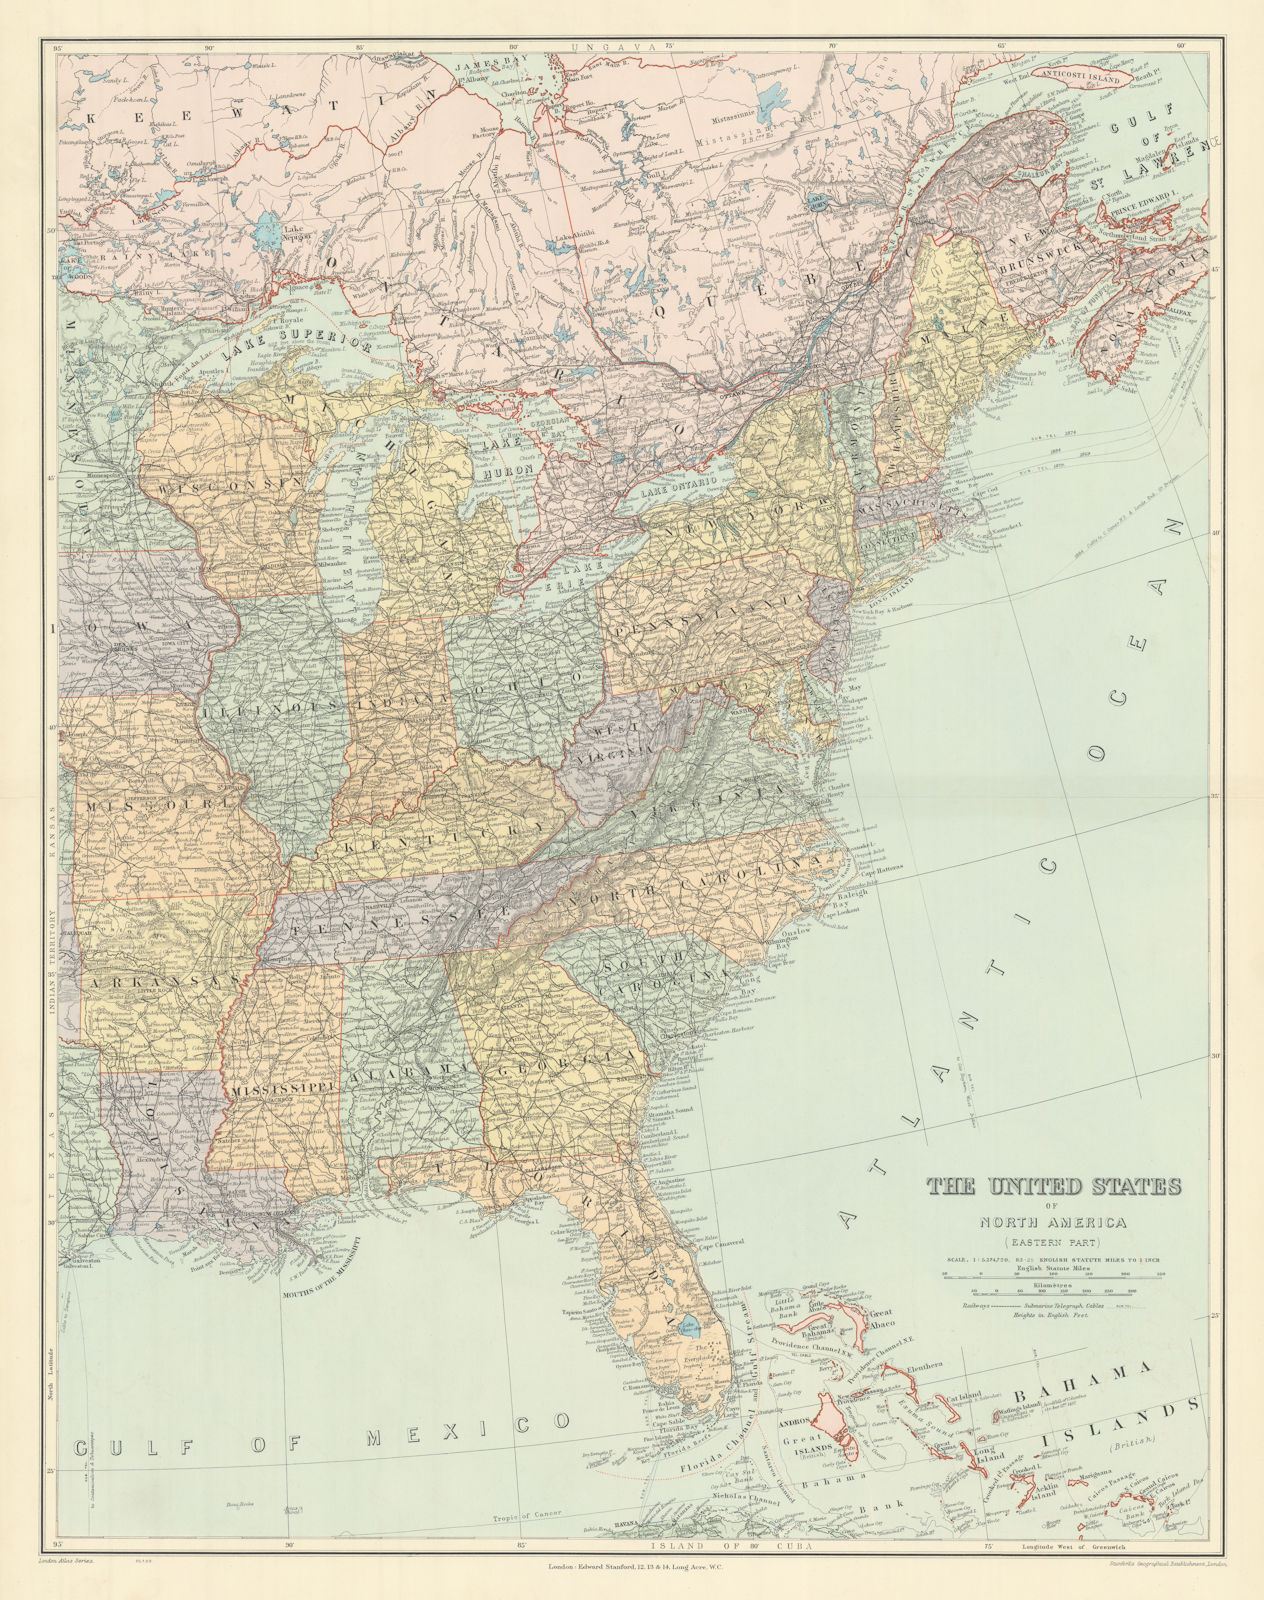 The United States of North America, Eastern part. USA. 69x54cm STANFORD 1904 map